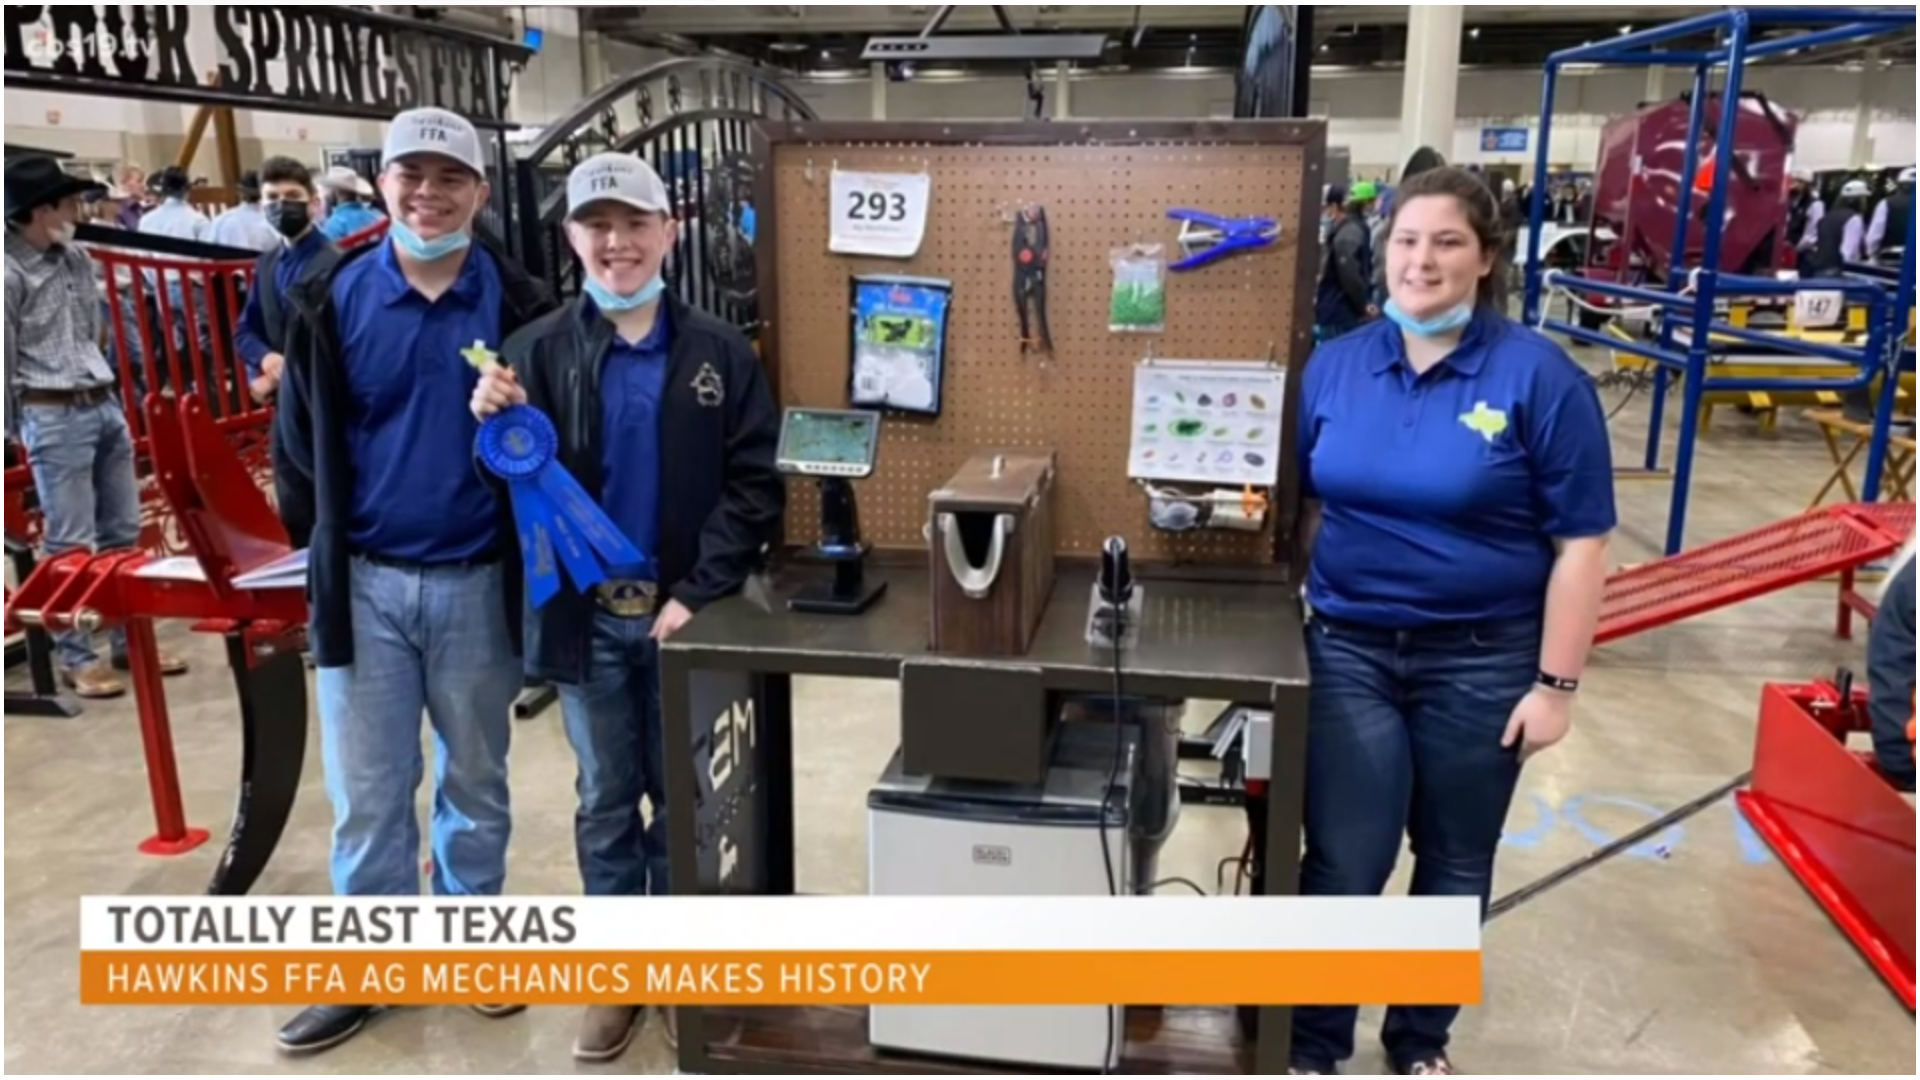 First, Hawkins FFA made headlines with bees and now, they've taken home a prestigious award from the Houston Livestock Show.